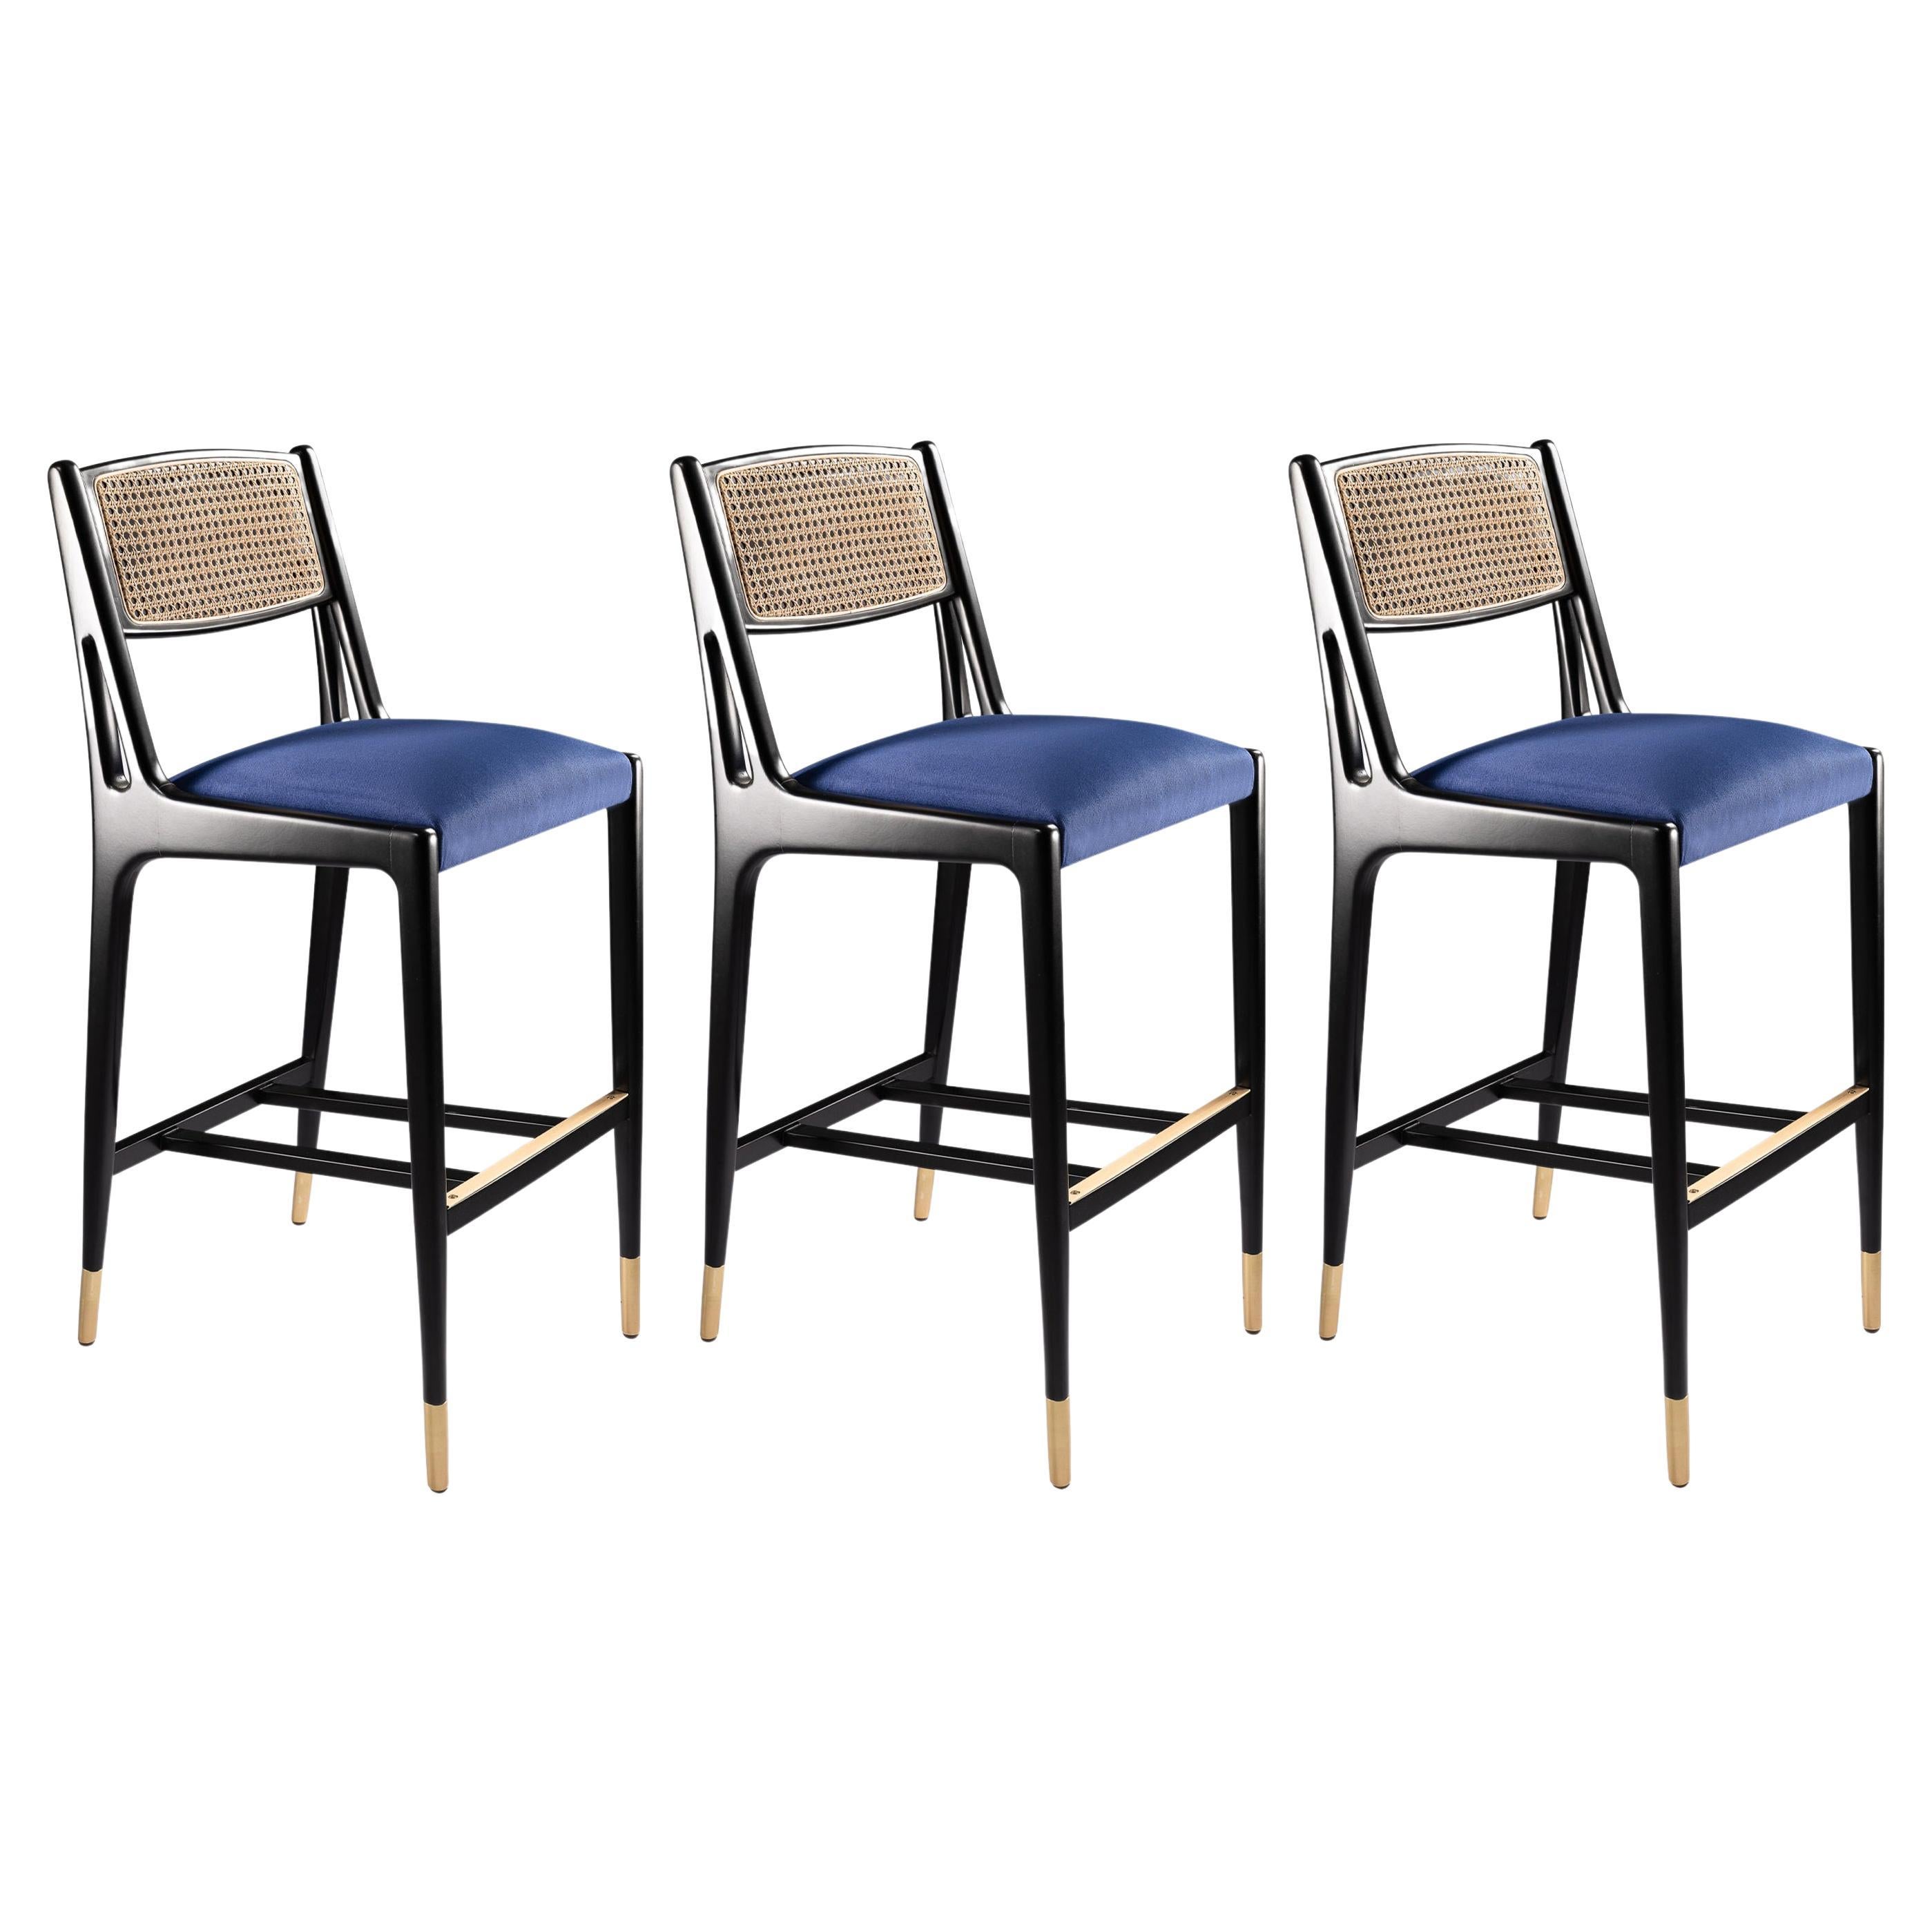 A mid-century barstool with a modern twist.
Handmade from the finest materials with Vienna straw back backrest and water repellent , stain resistant velvet, The structure is lacquered in black with gold polished stainless steel detailing.
Available